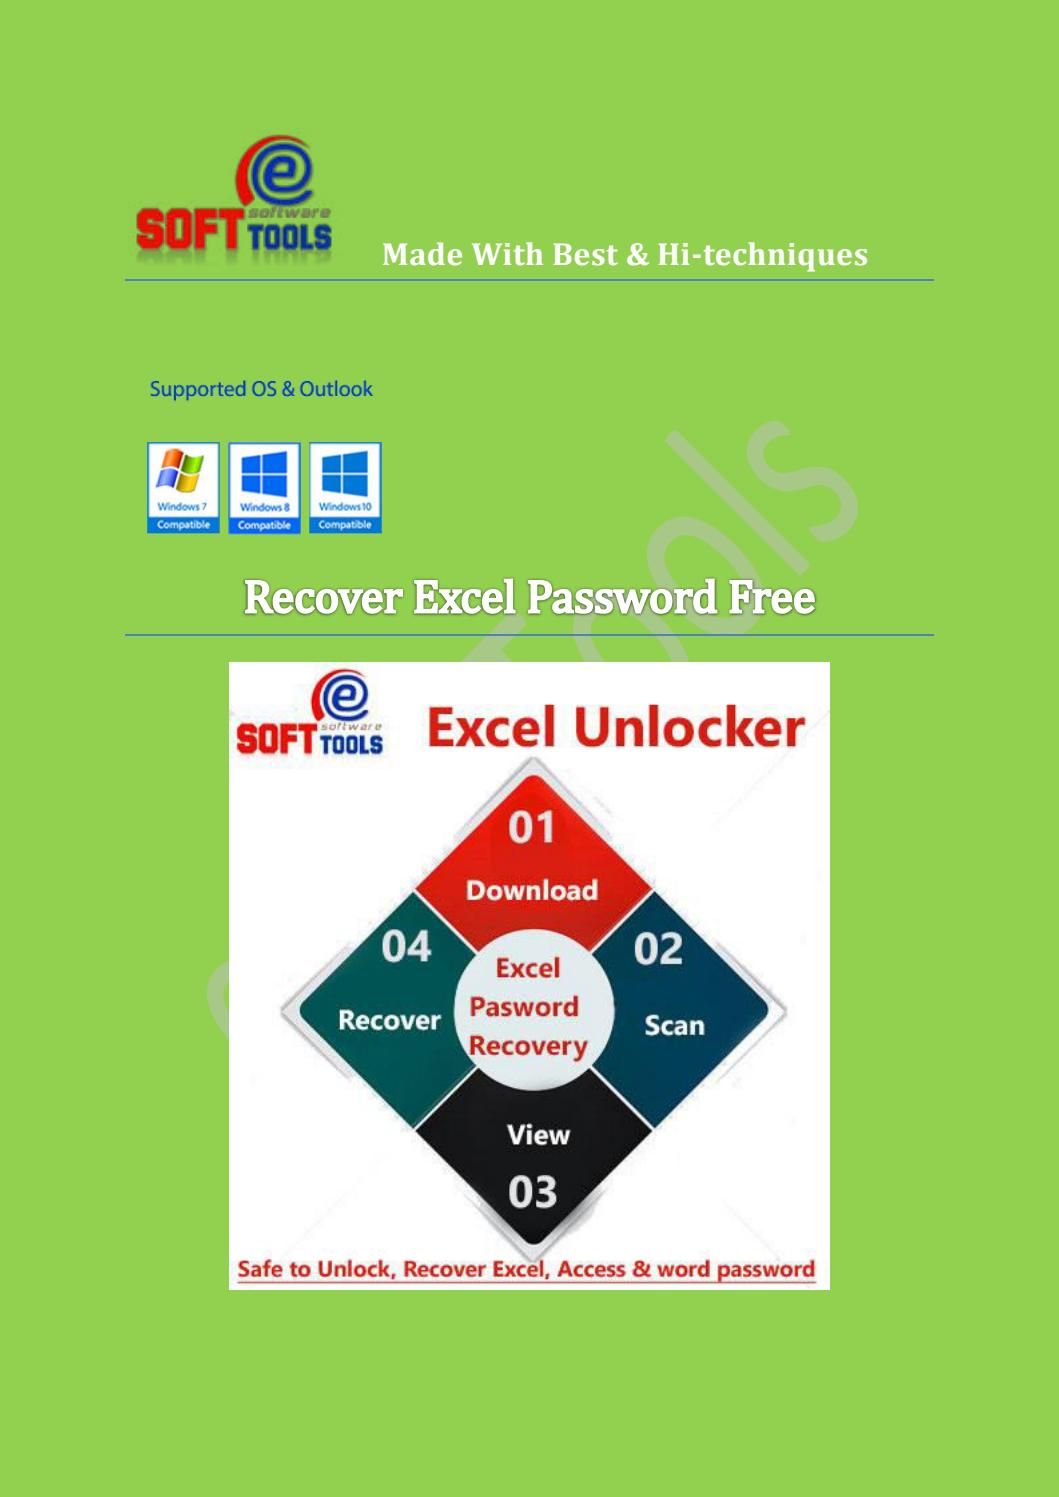 free word password recovery tool